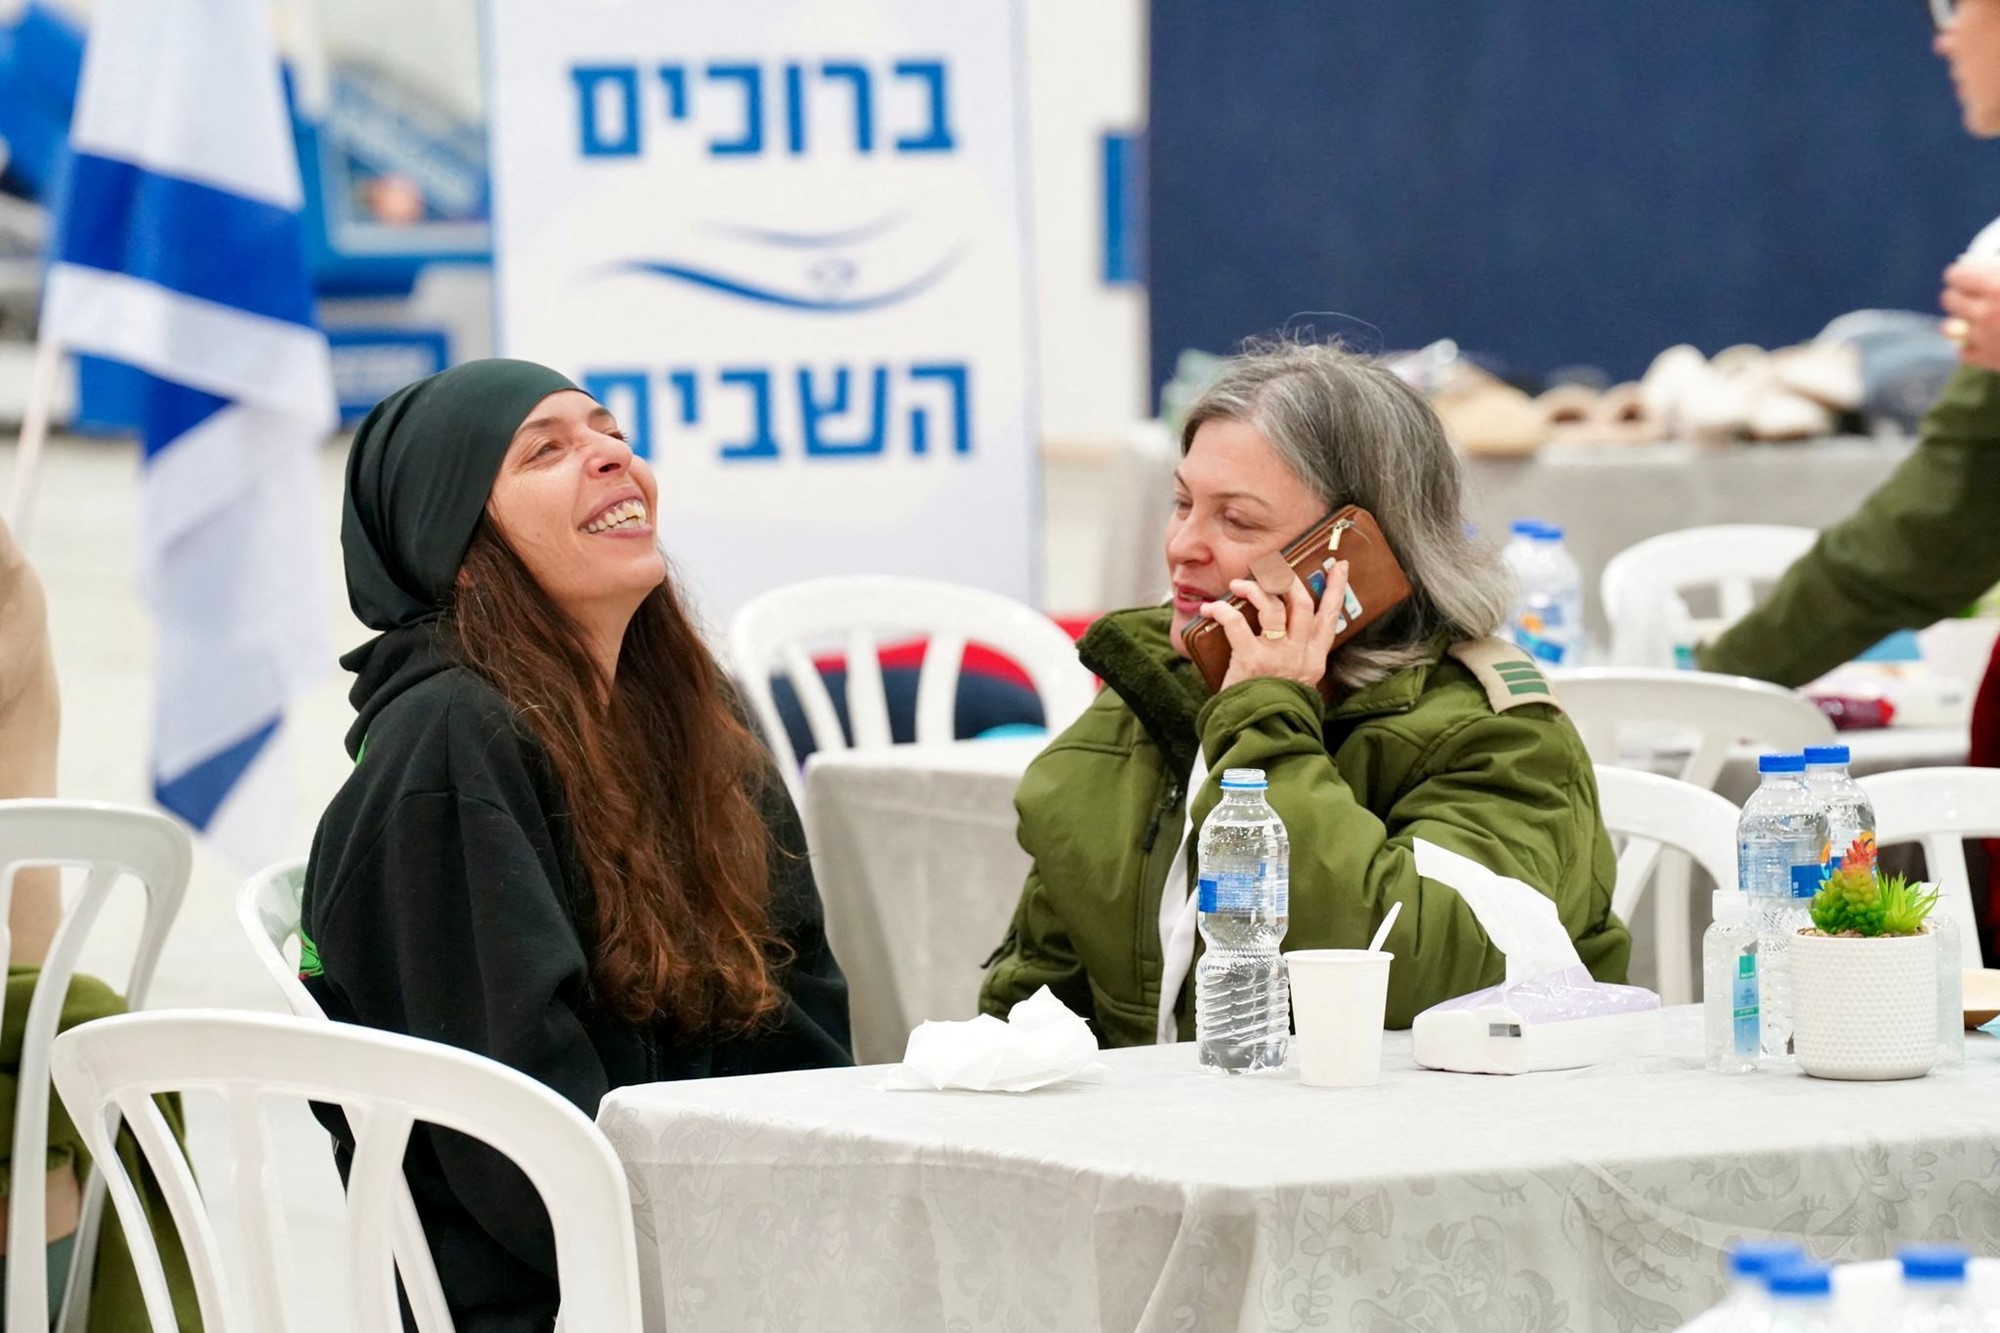 A woman looks up an laughs, another is speaking on the phone as they sit down at a table